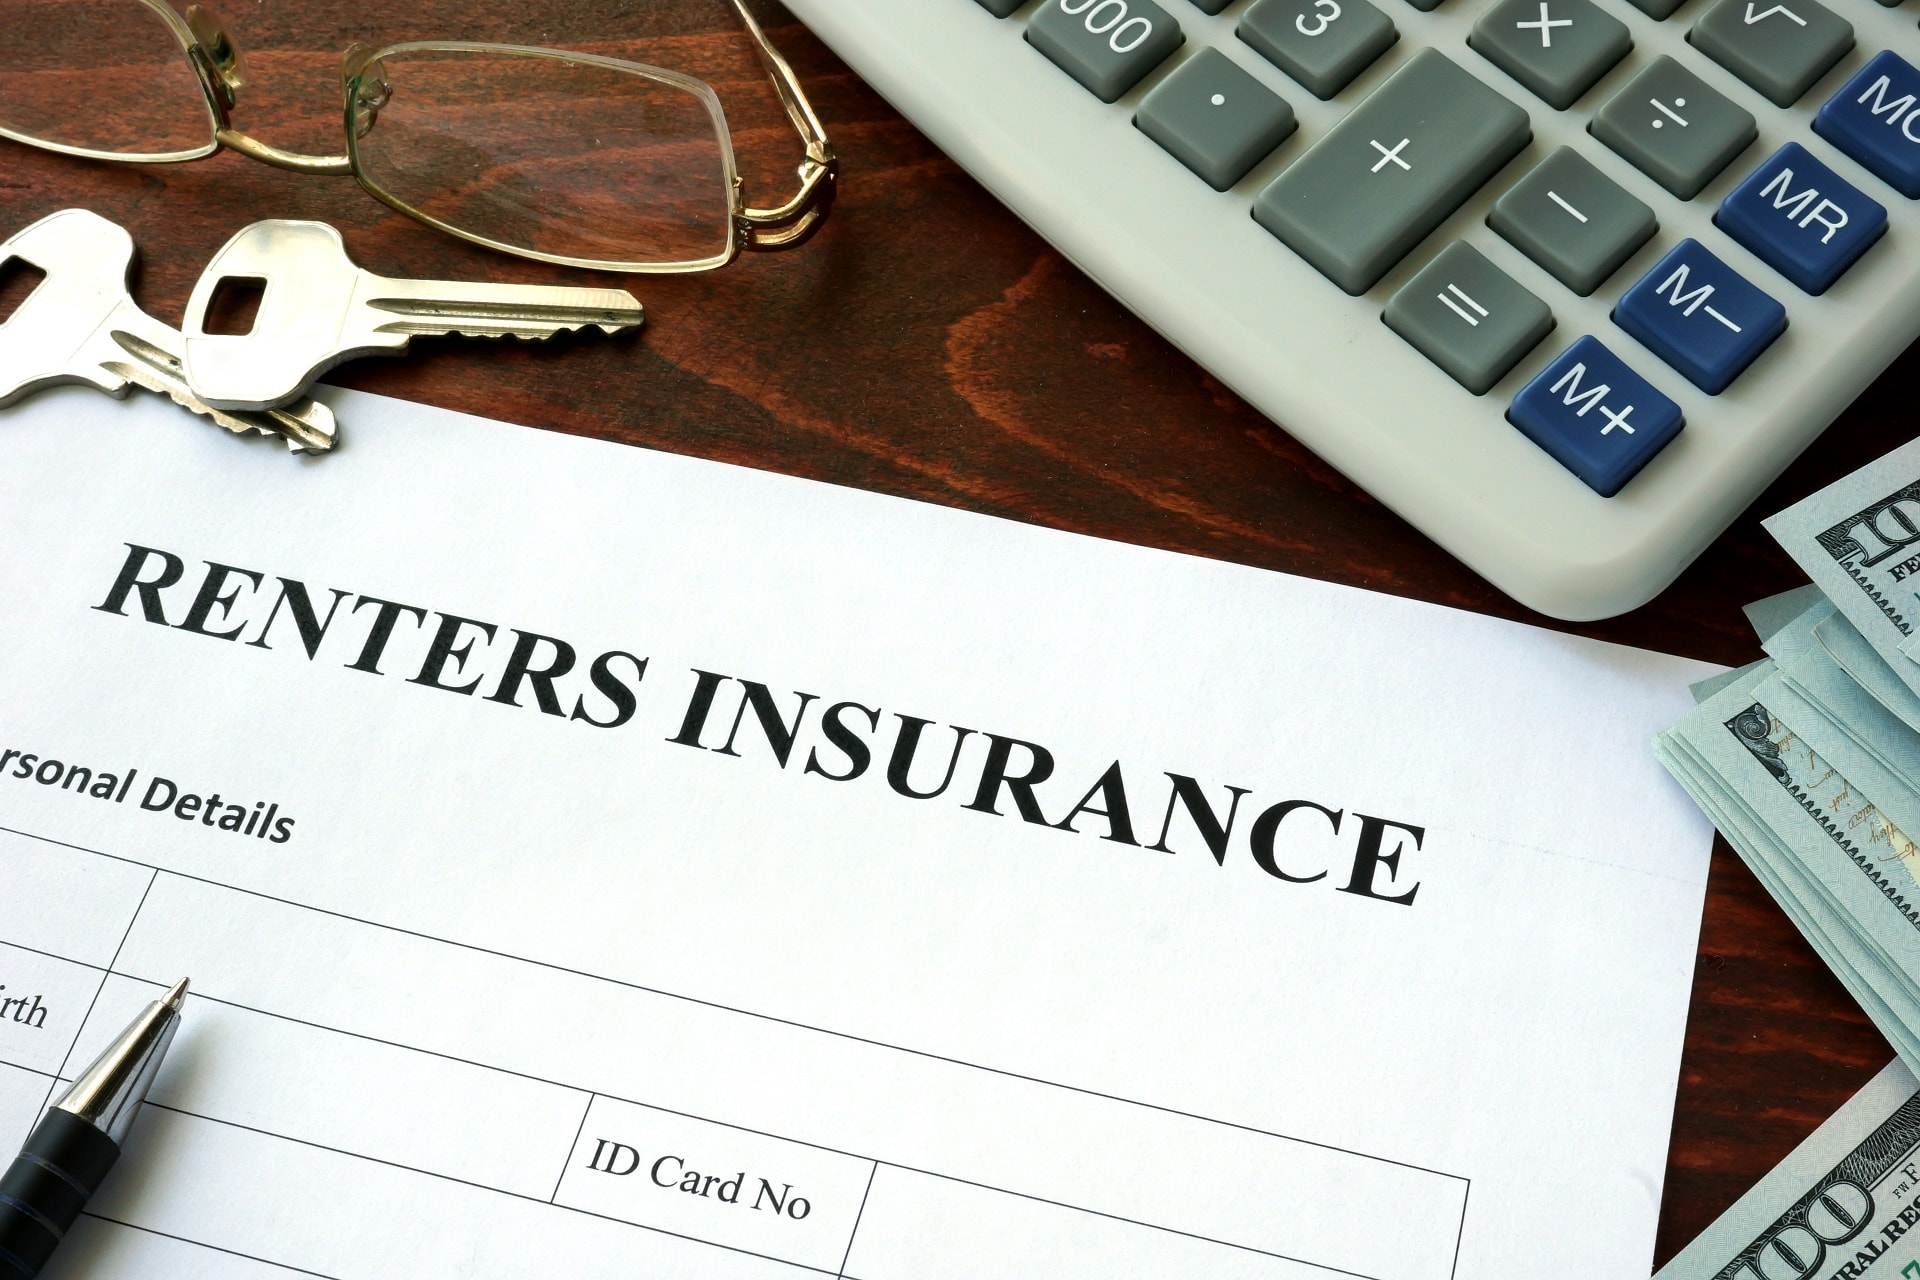 Renter's Insurance in NYC Do you need it? Platinum